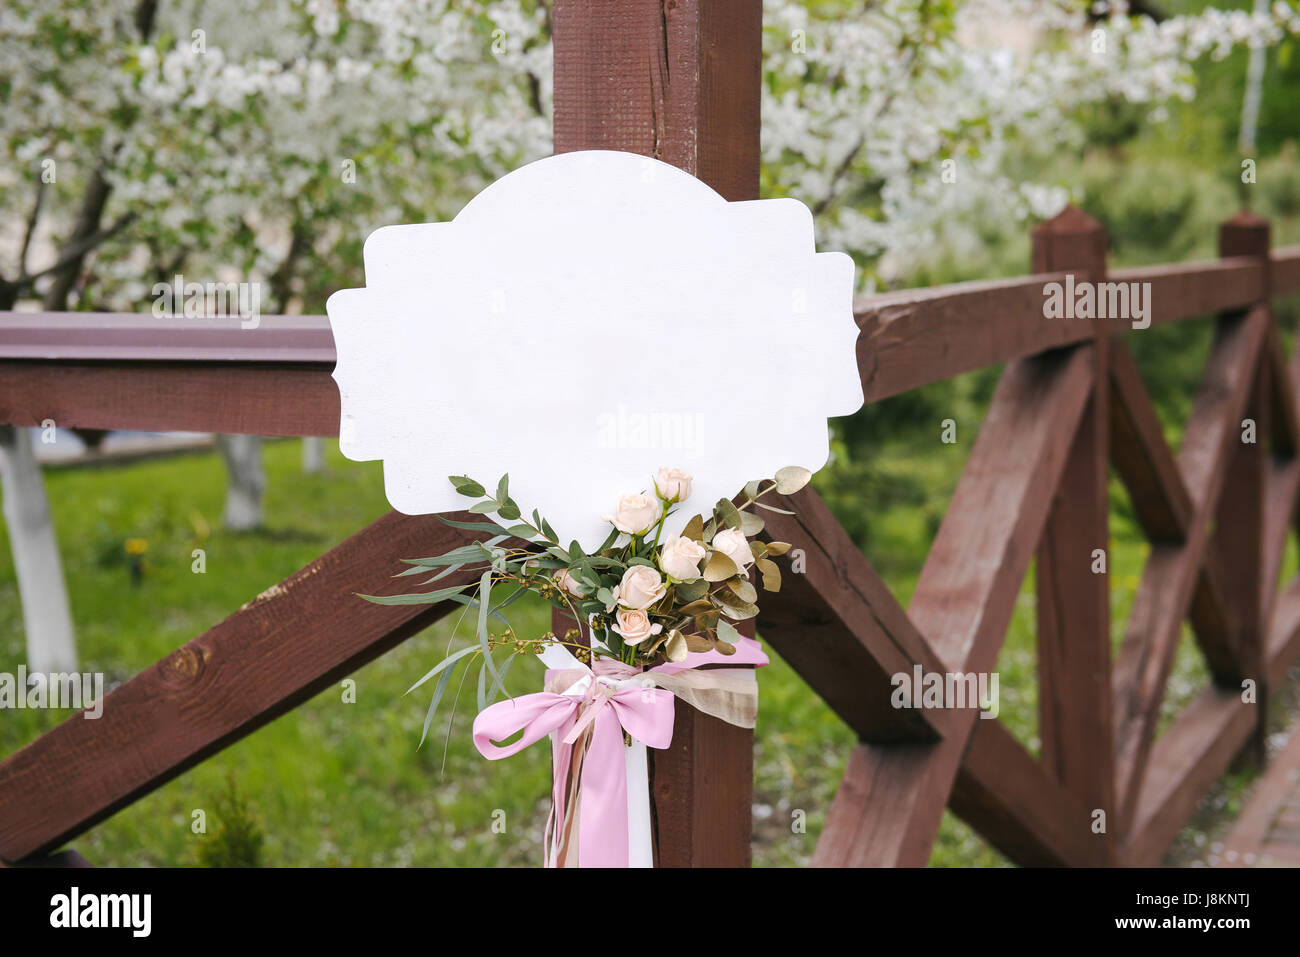 Accessory, white nameboard with nice boutonniere and bow Stock Photo